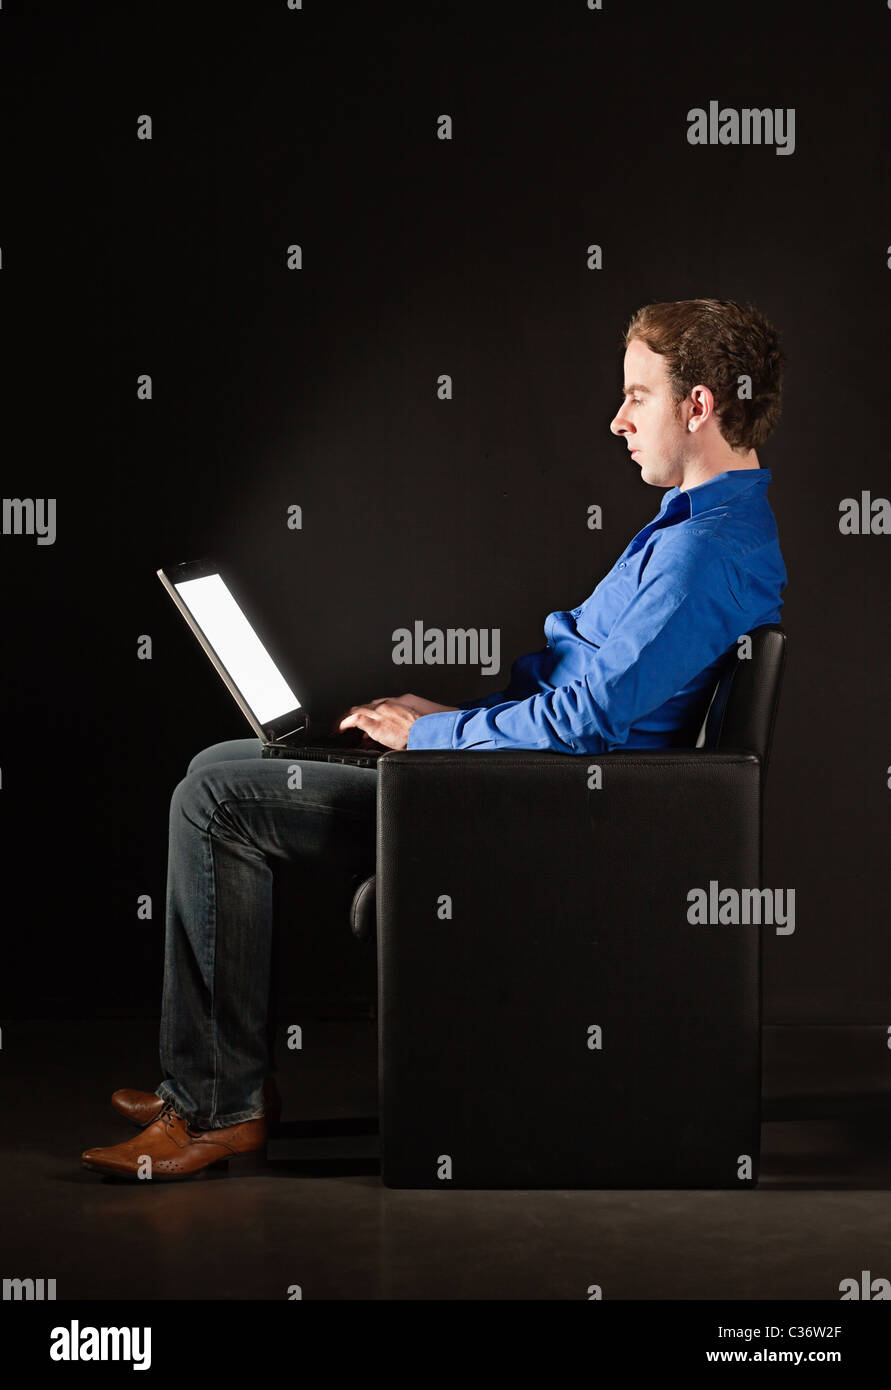 Young man sitting in the darkness with laptop, illuminated by the light from the screen Stock Photo